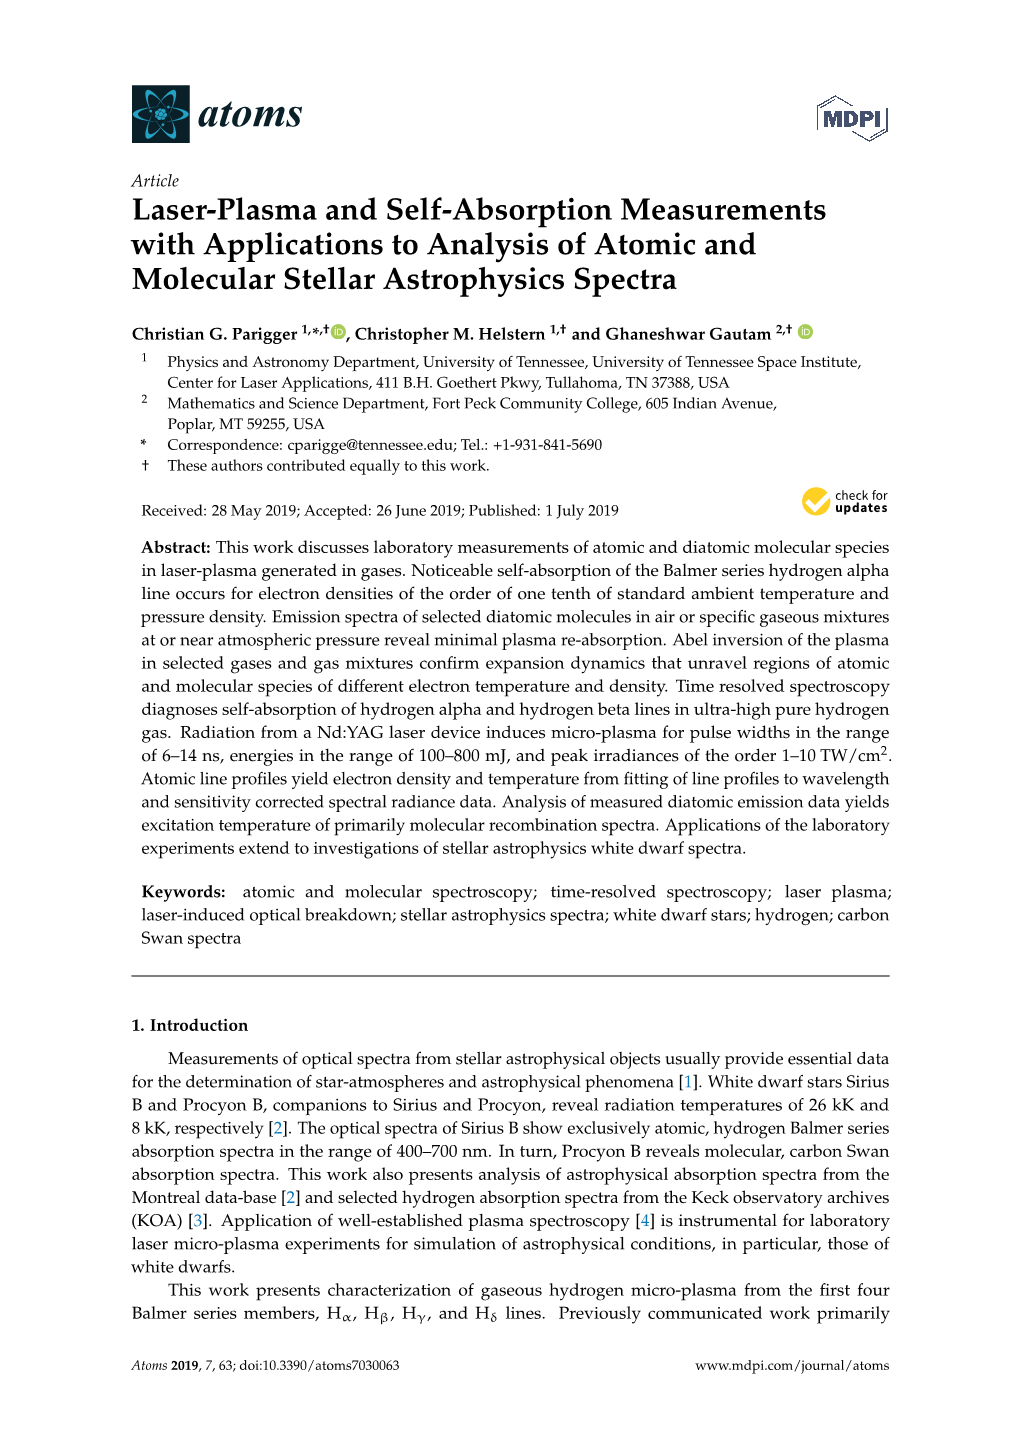 Laser-Plasma and Self-Absorption Measurements with Applications to Analysis of Atomic and Molecular Stellar Astrophysics Spectra